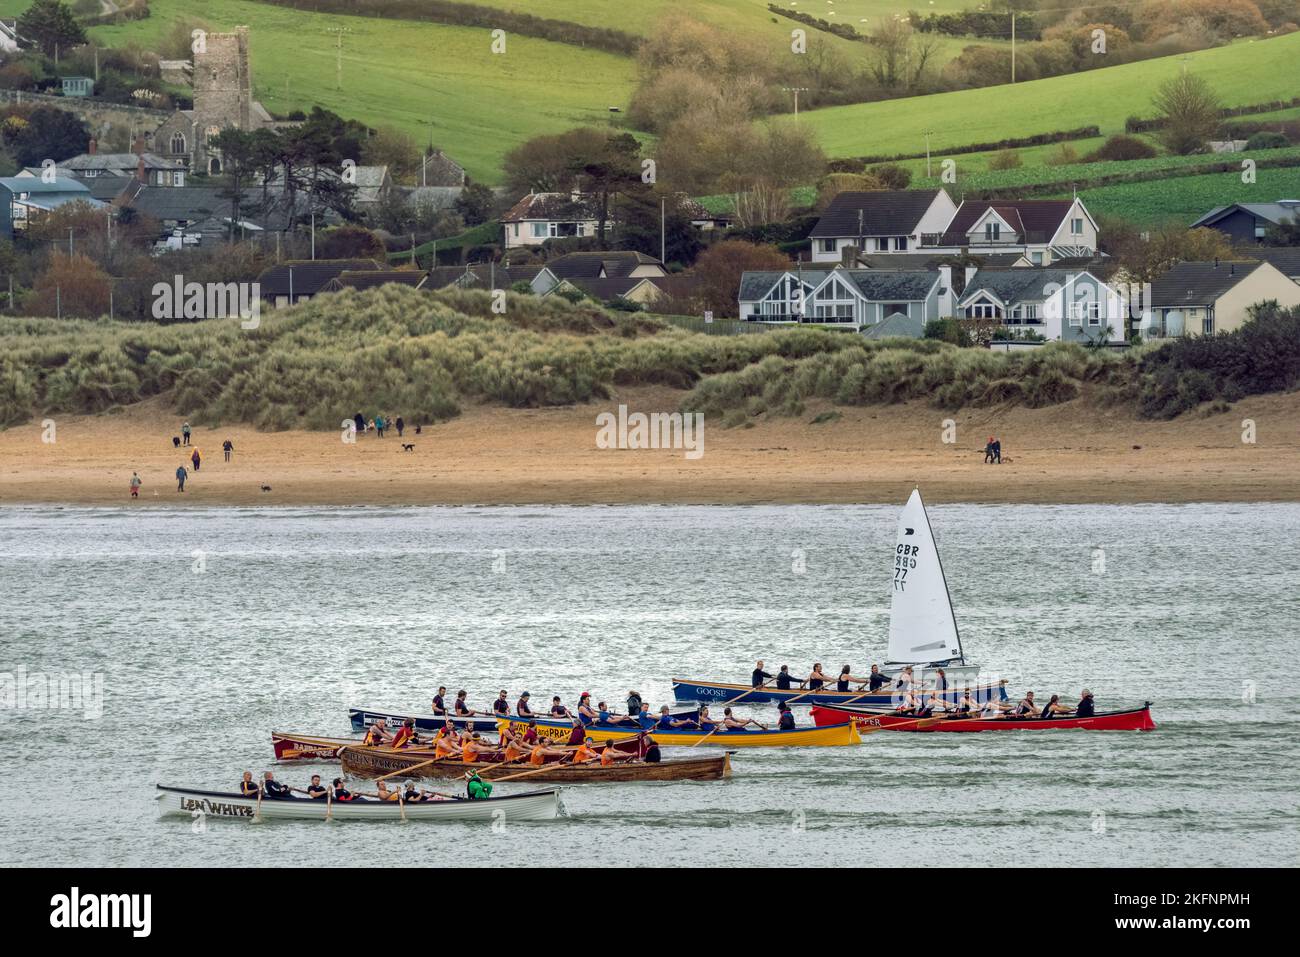 Appledore, North Devon, England. Saturday 19th November 2022 - On a mild day in North Devon, Appledore hosts the 'Lundy League Gig Boat Racing Series' on the River Torridge estuary with nine clubs in attendance from North Cornwall, Devon and Somerset. Credit: Terry Mathews/Alamy Live News Stock Photo